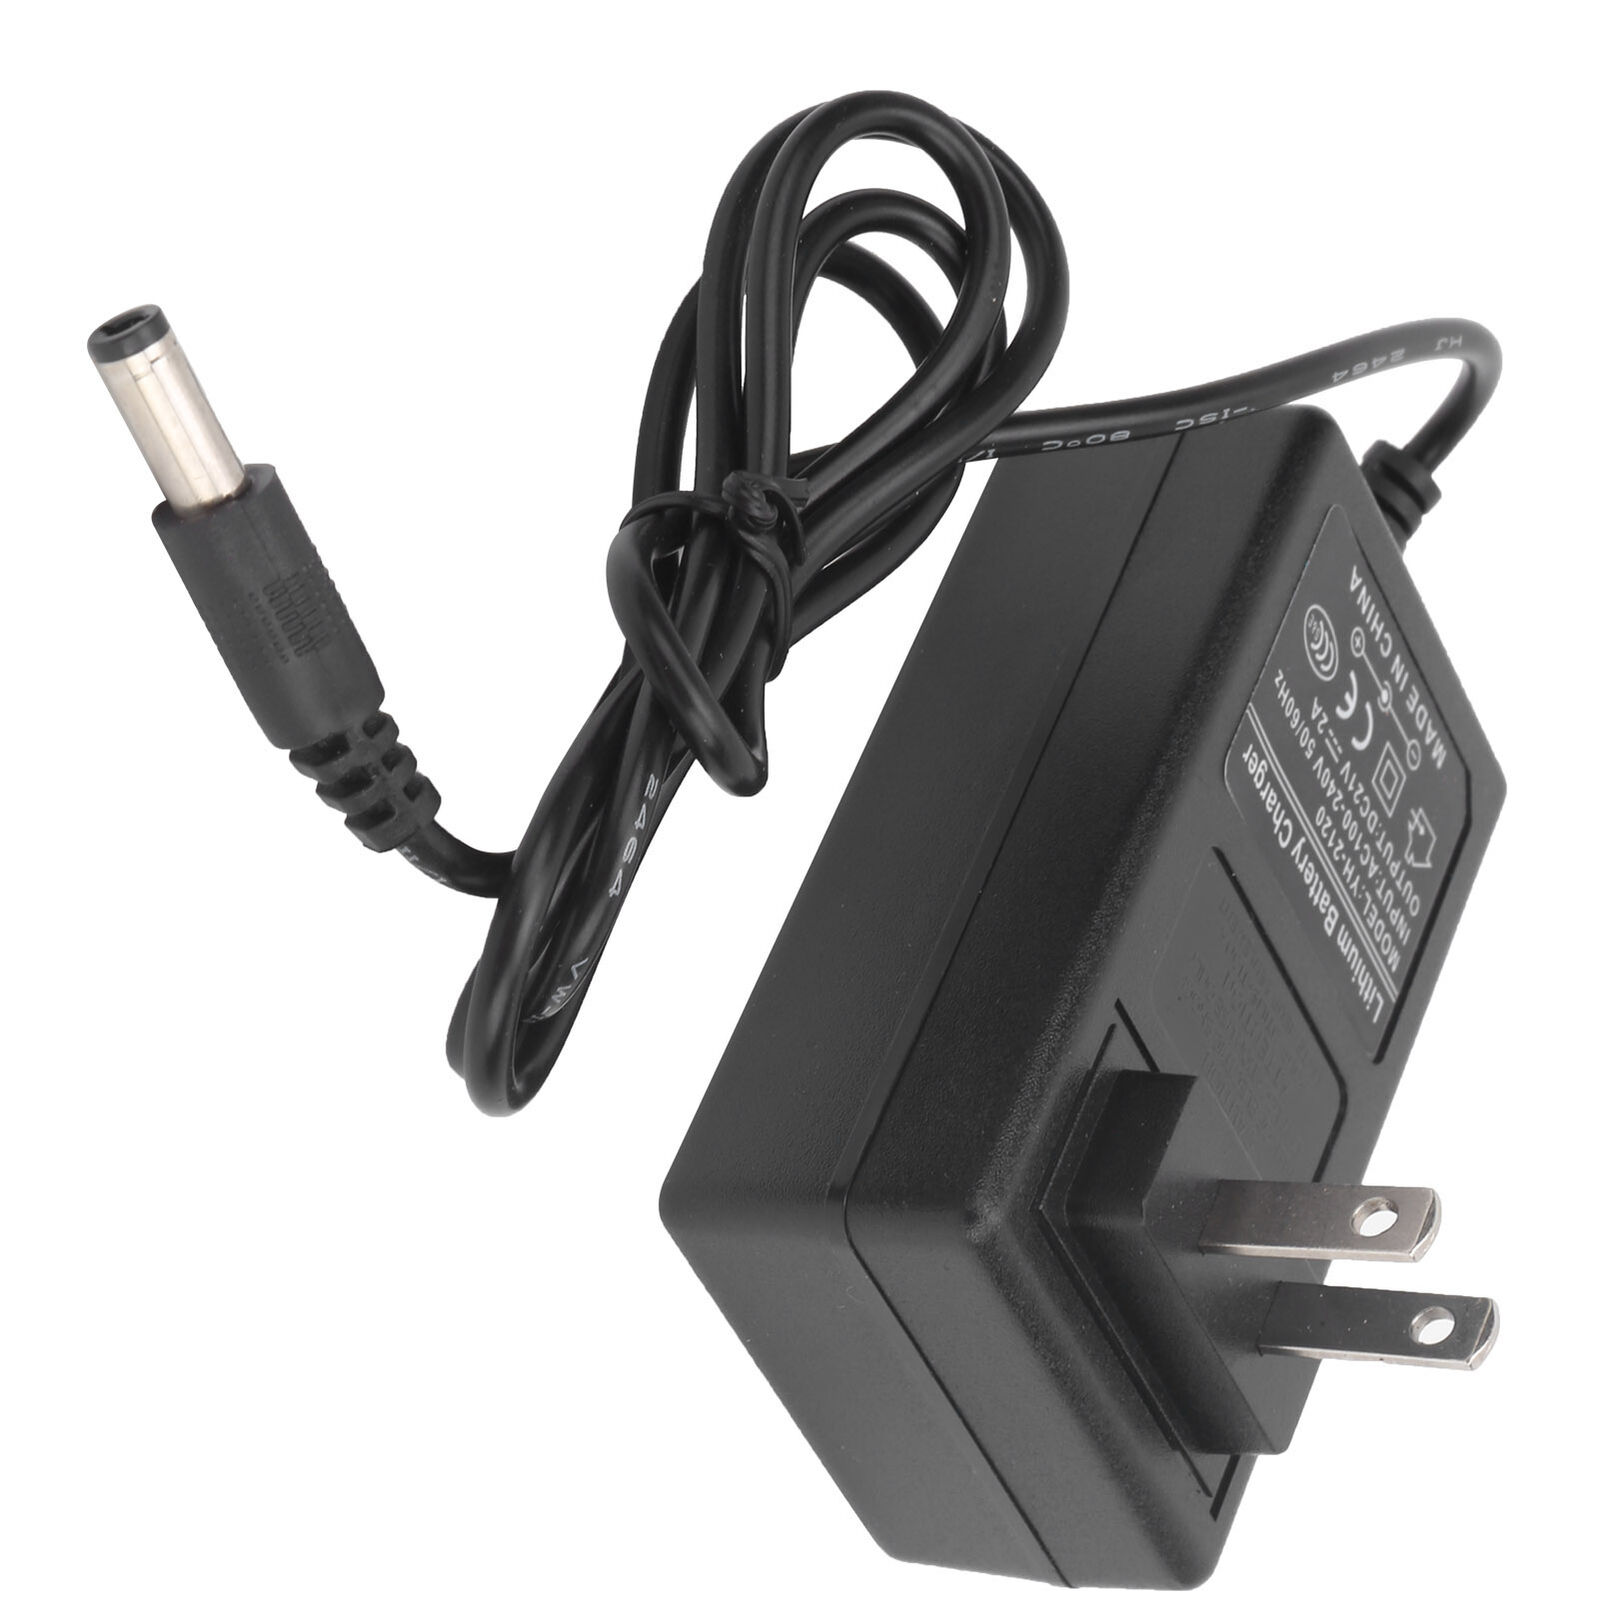 *Brand NEW*iRobot Braava 320 Floor Mopping Robot DC Charger 12V AC Adapter Power Supply - Click Image to Close